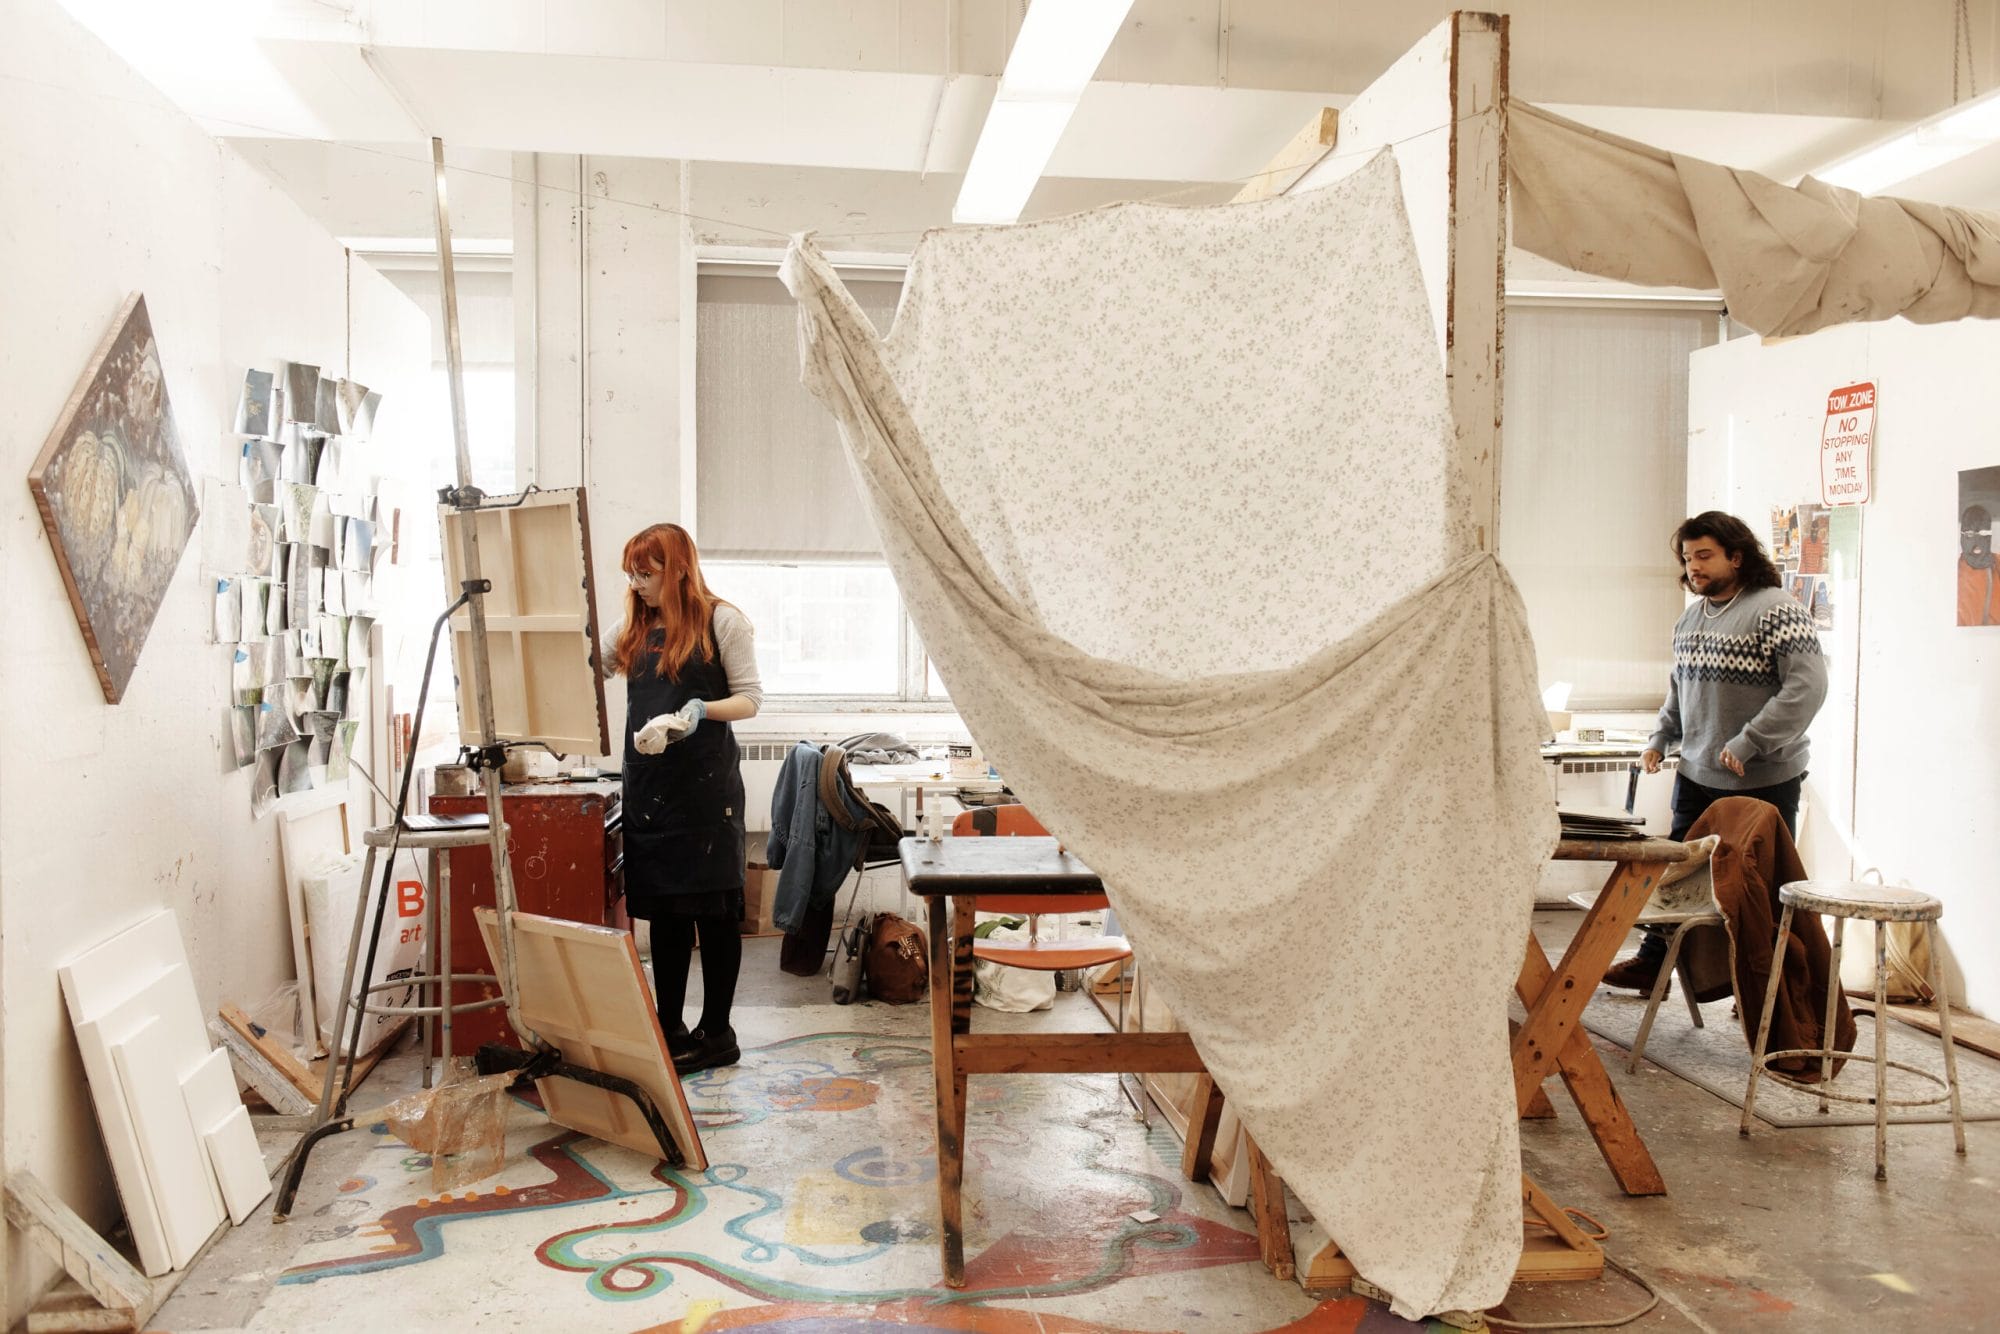 A curtain hangs down through the middle of the photo dividing two painting studios; a woman stands on the left and a man on the right in their studios.